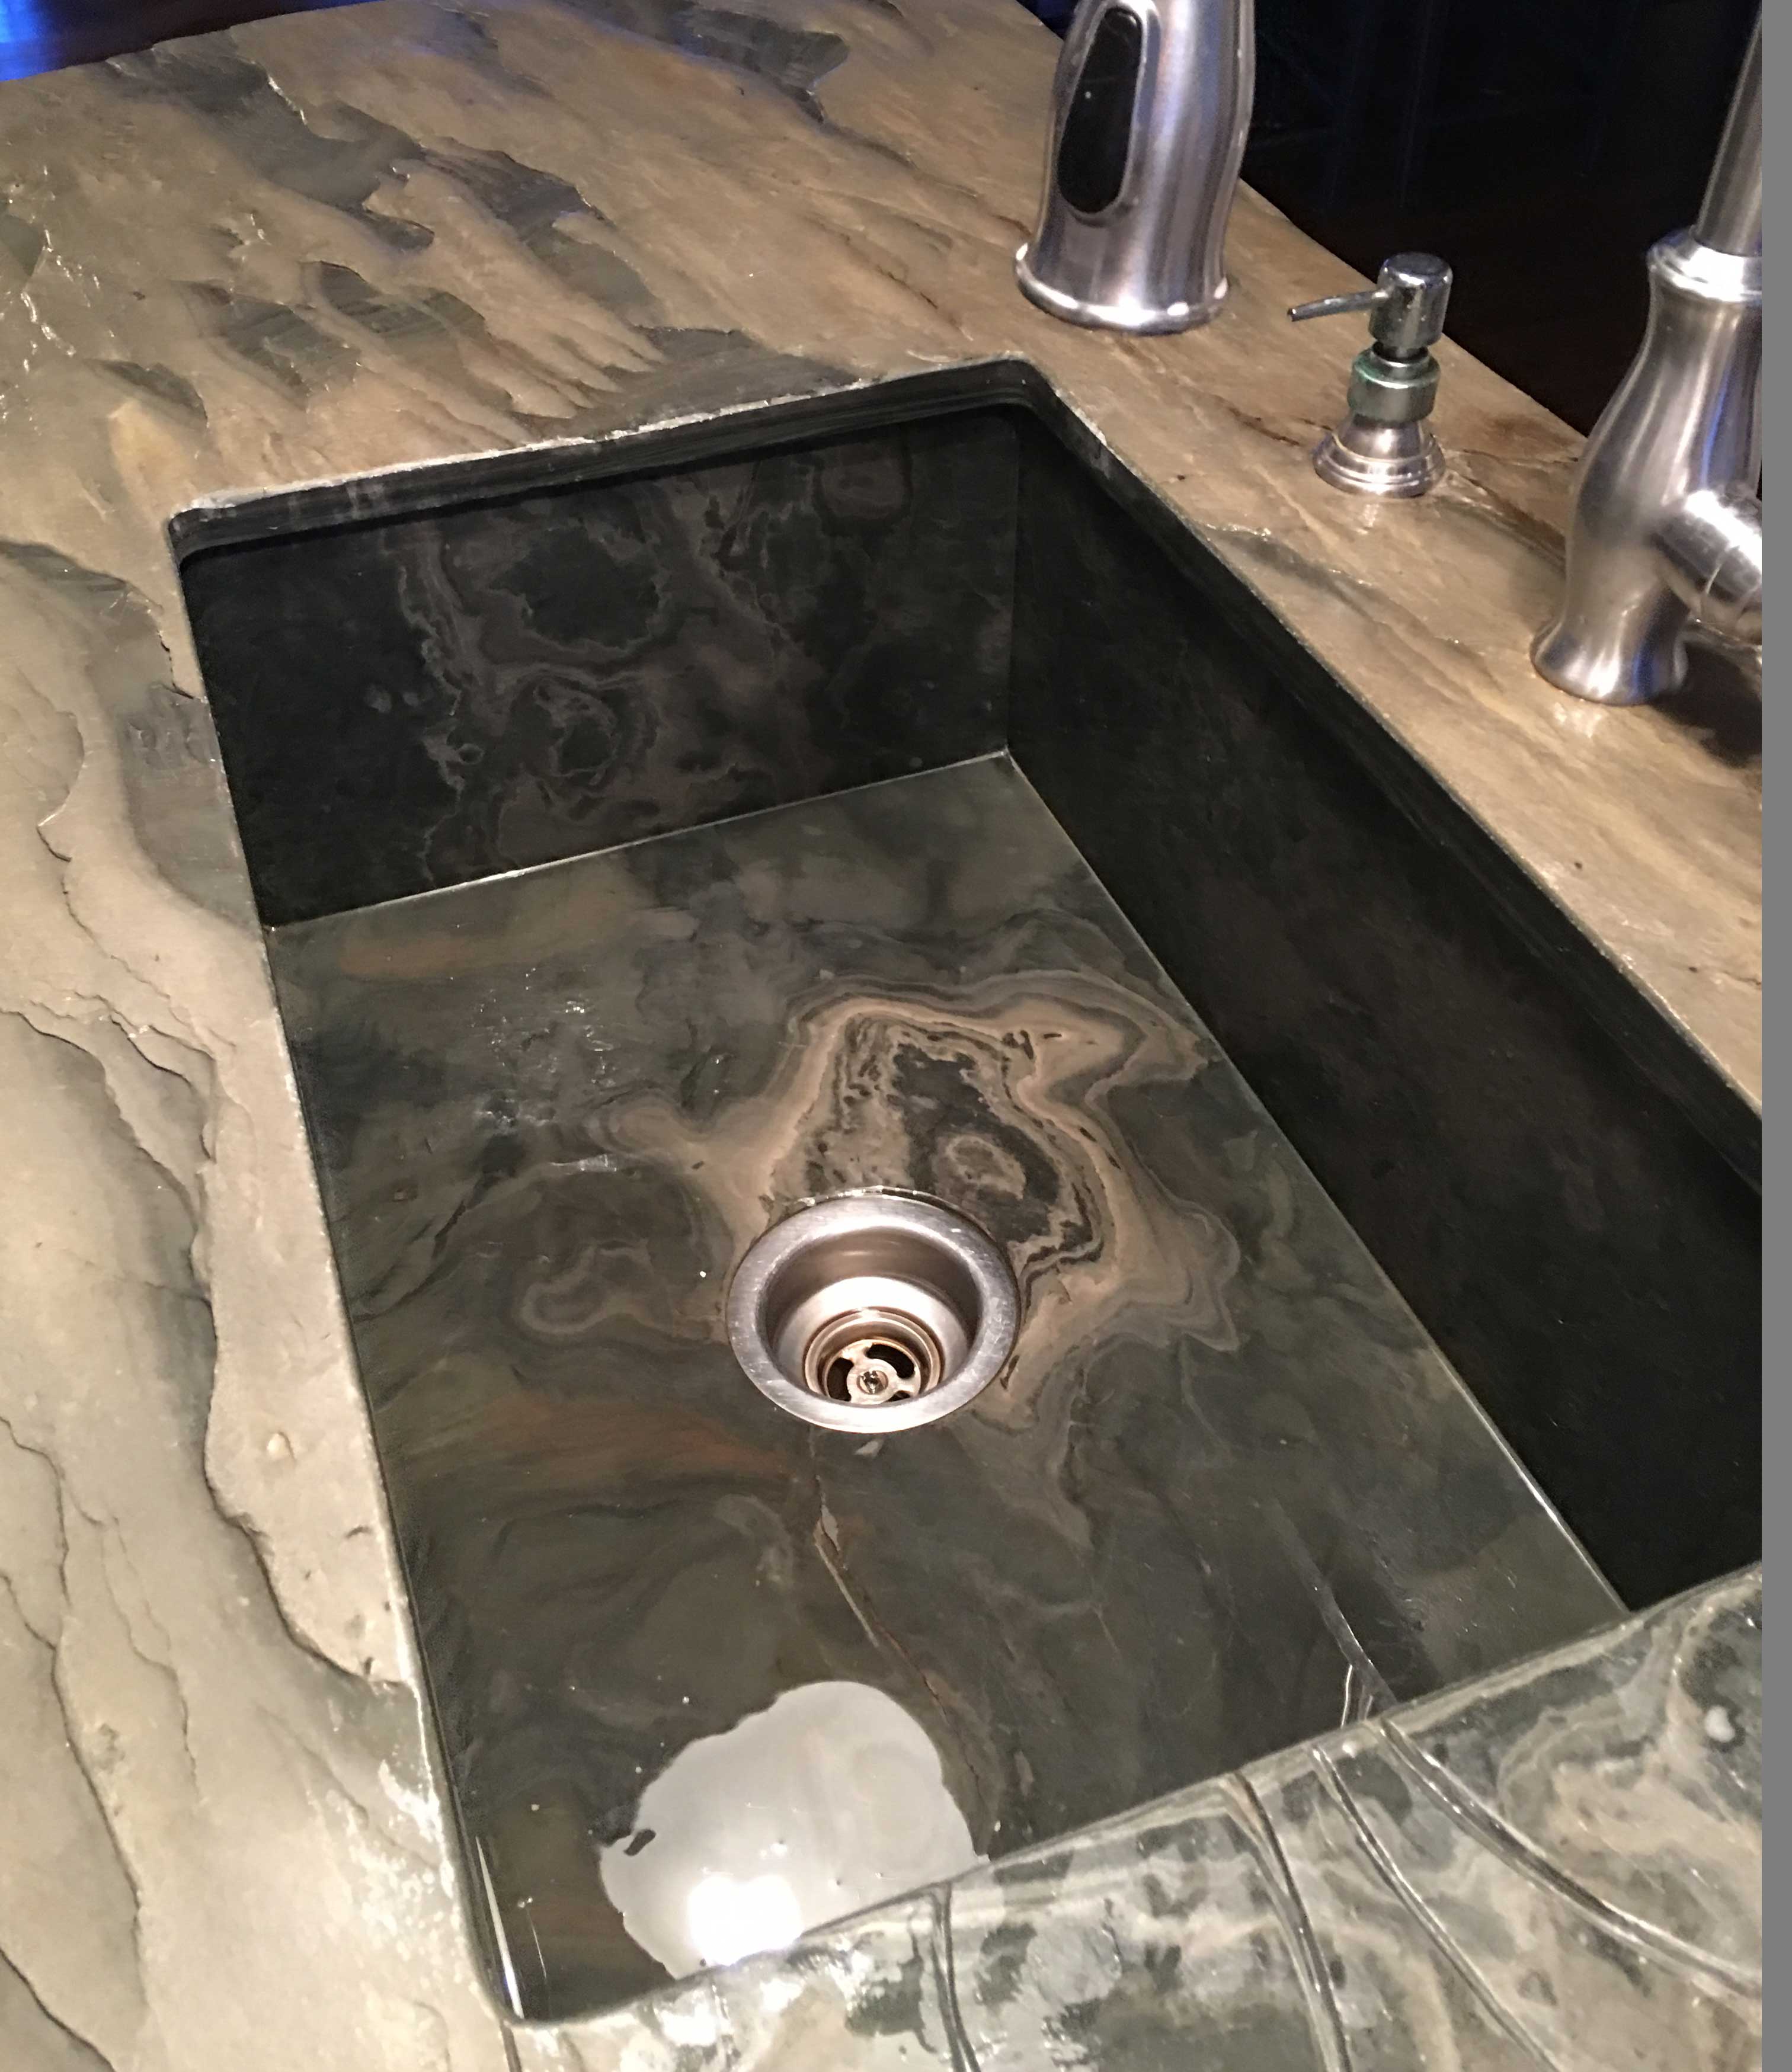 Slate sink and countertop